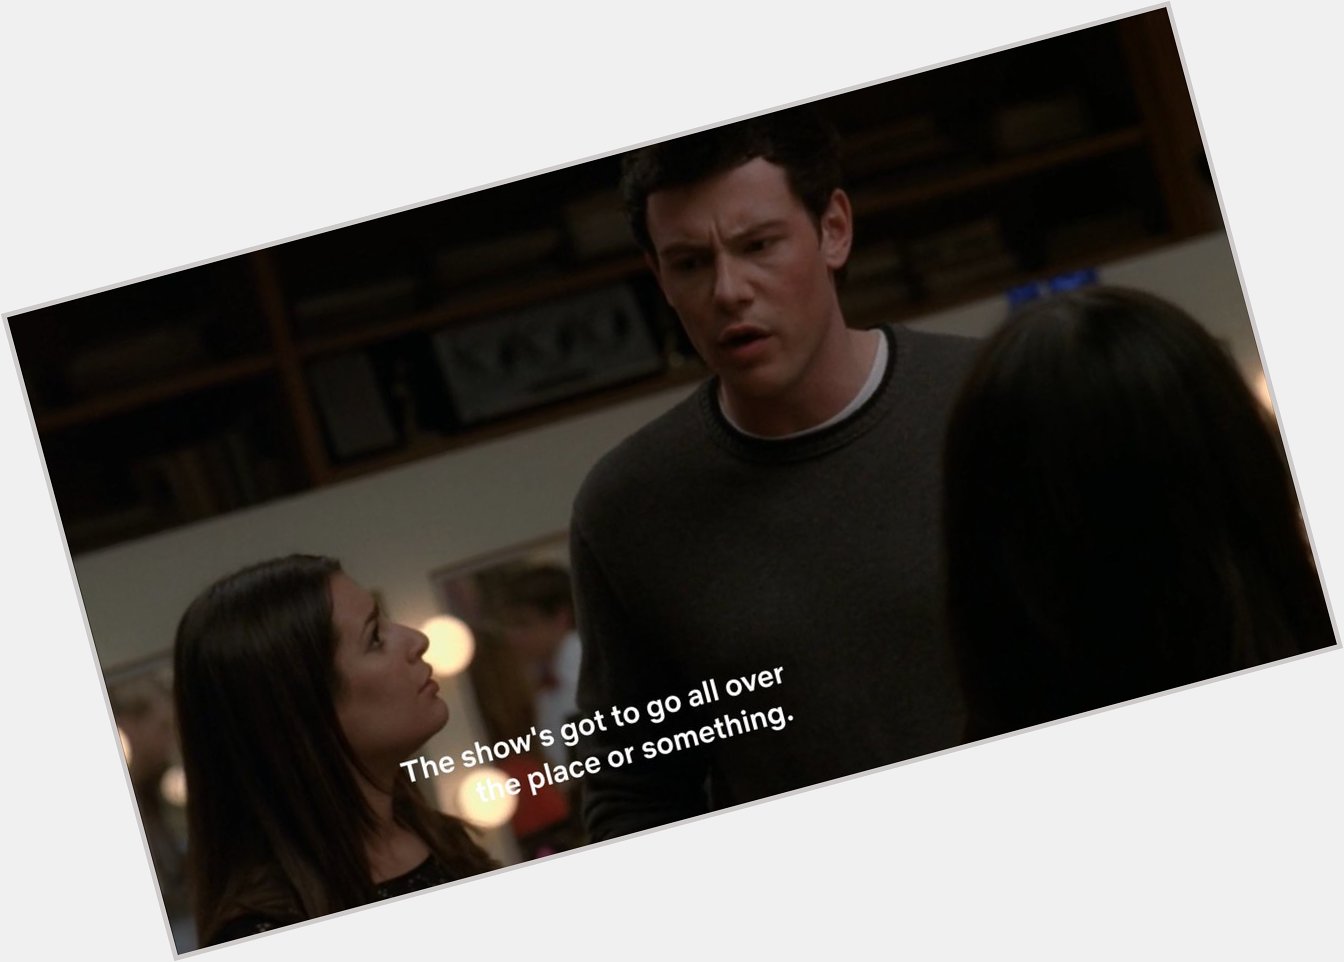 Happy Birthday, Cory Monteith
You deserved better. 